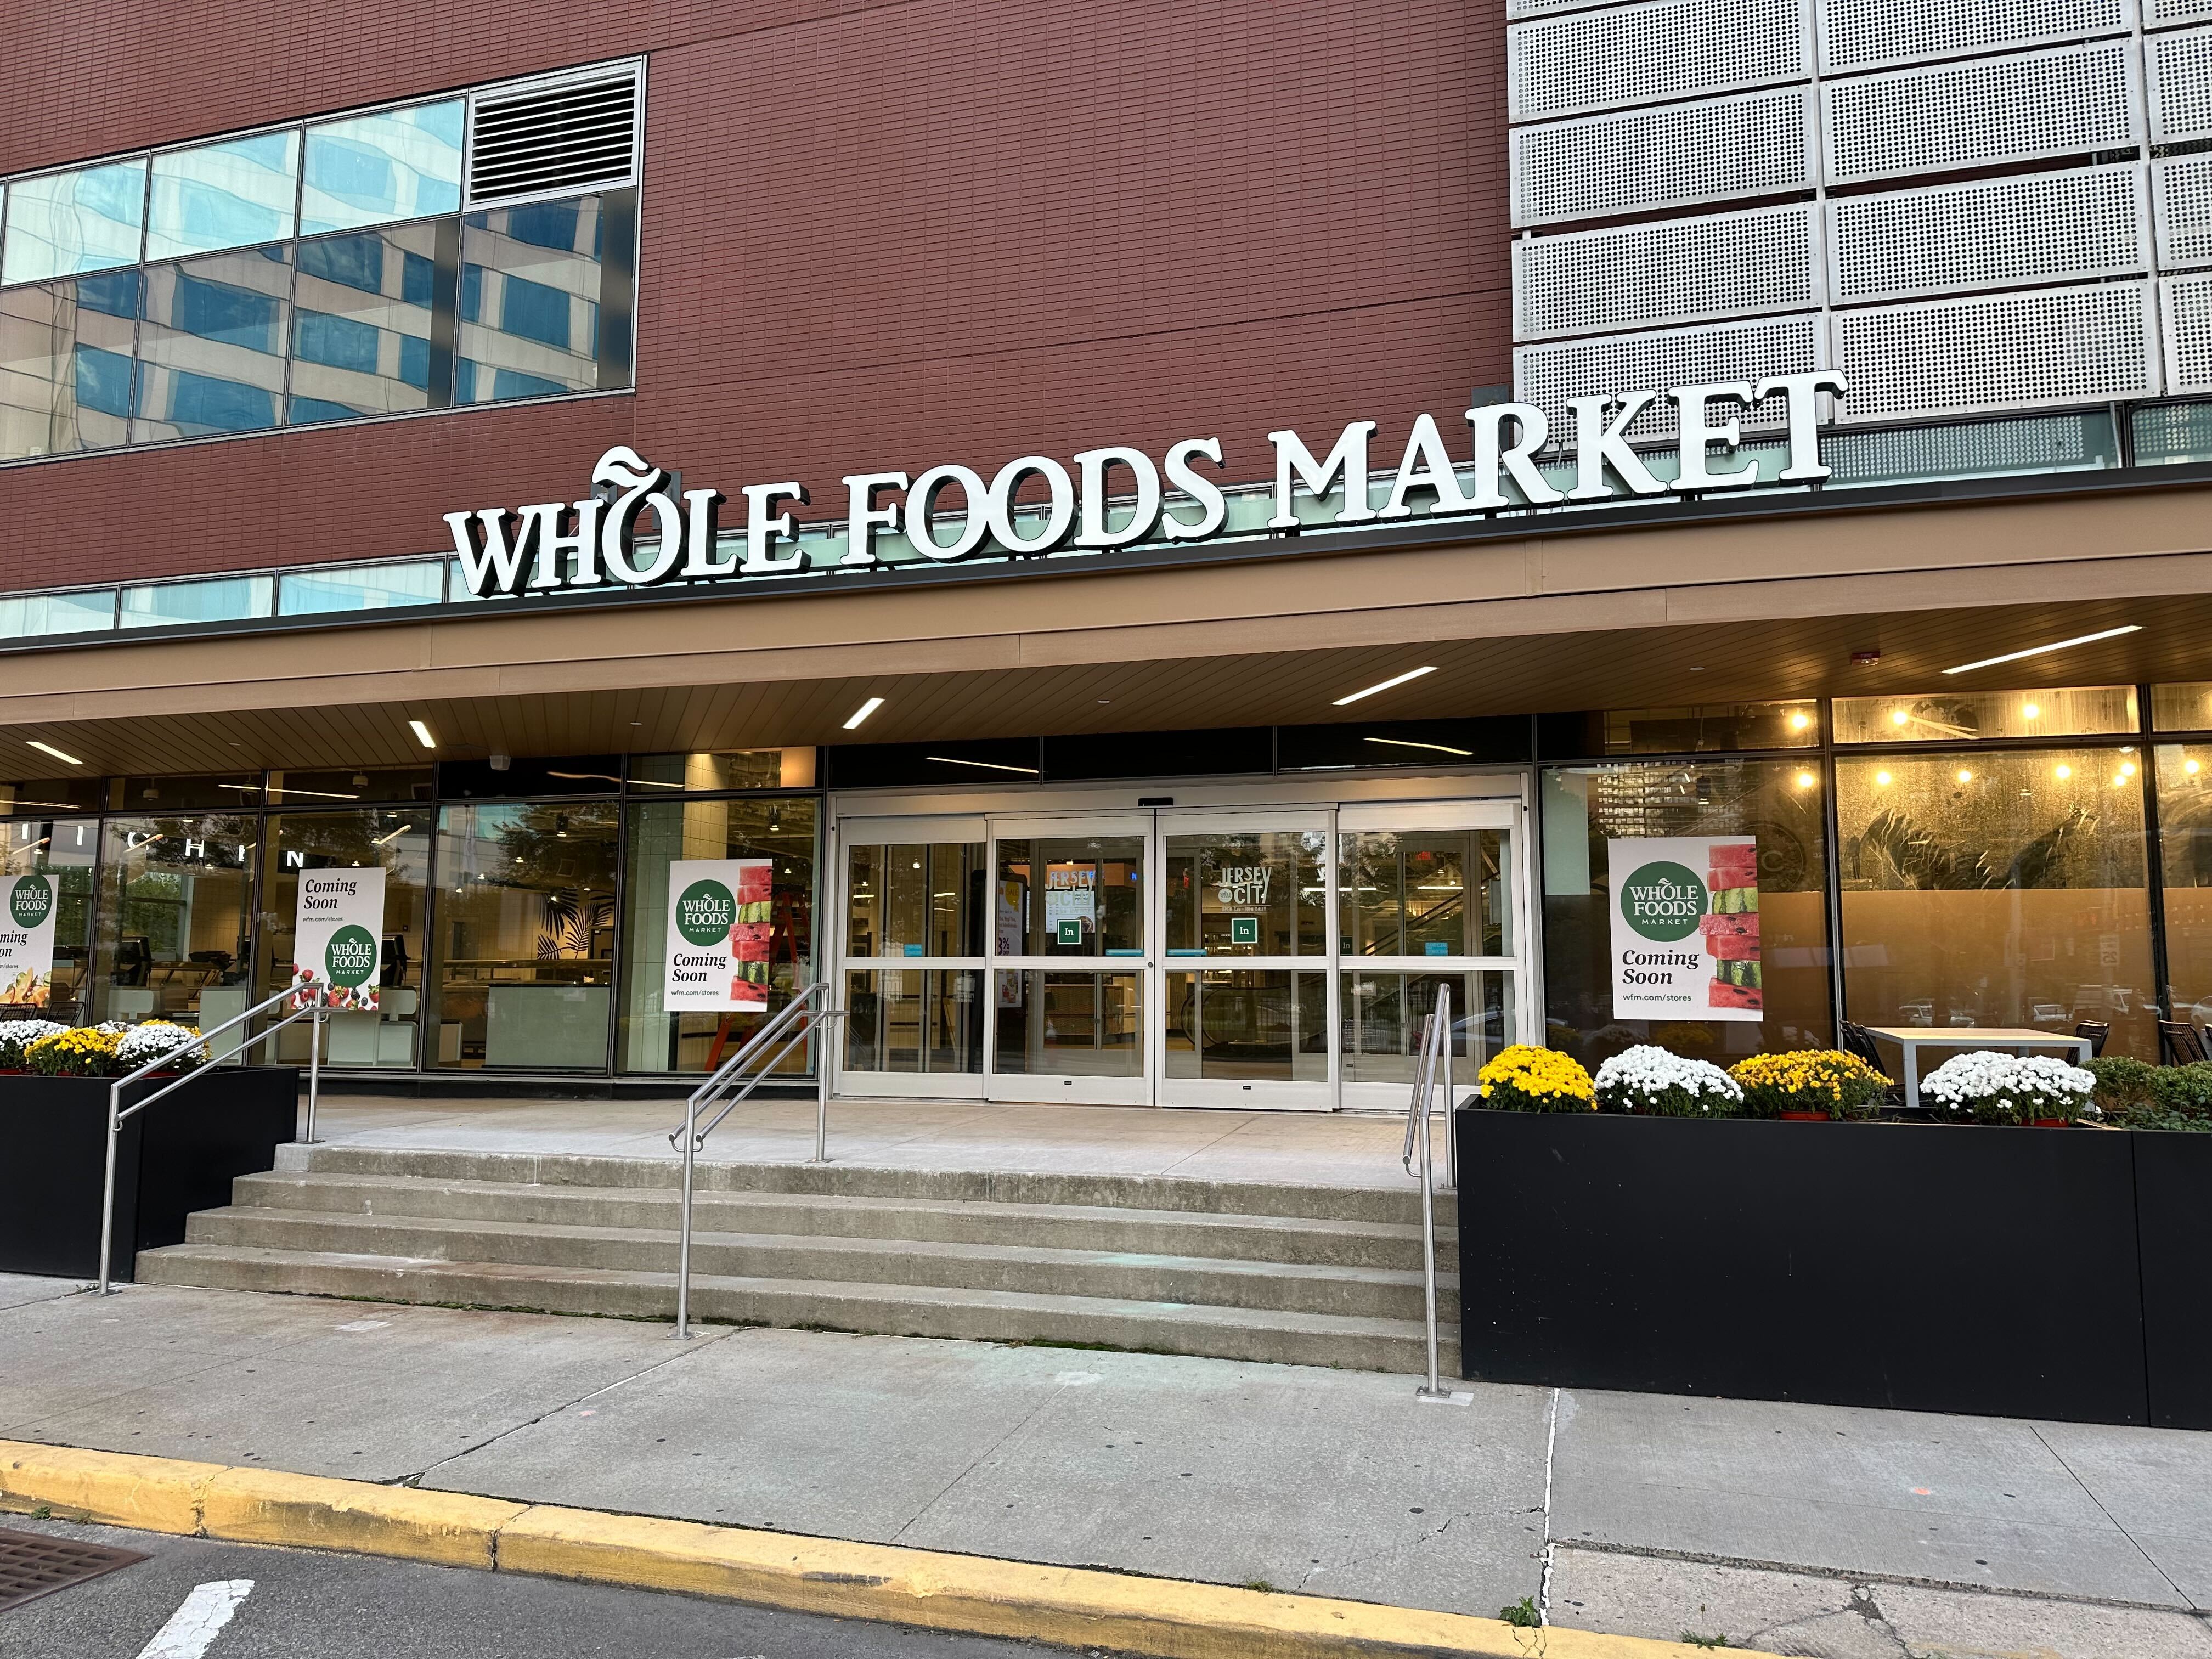 Whole Foods Market (@wholefoods) • Instagram photos and videos